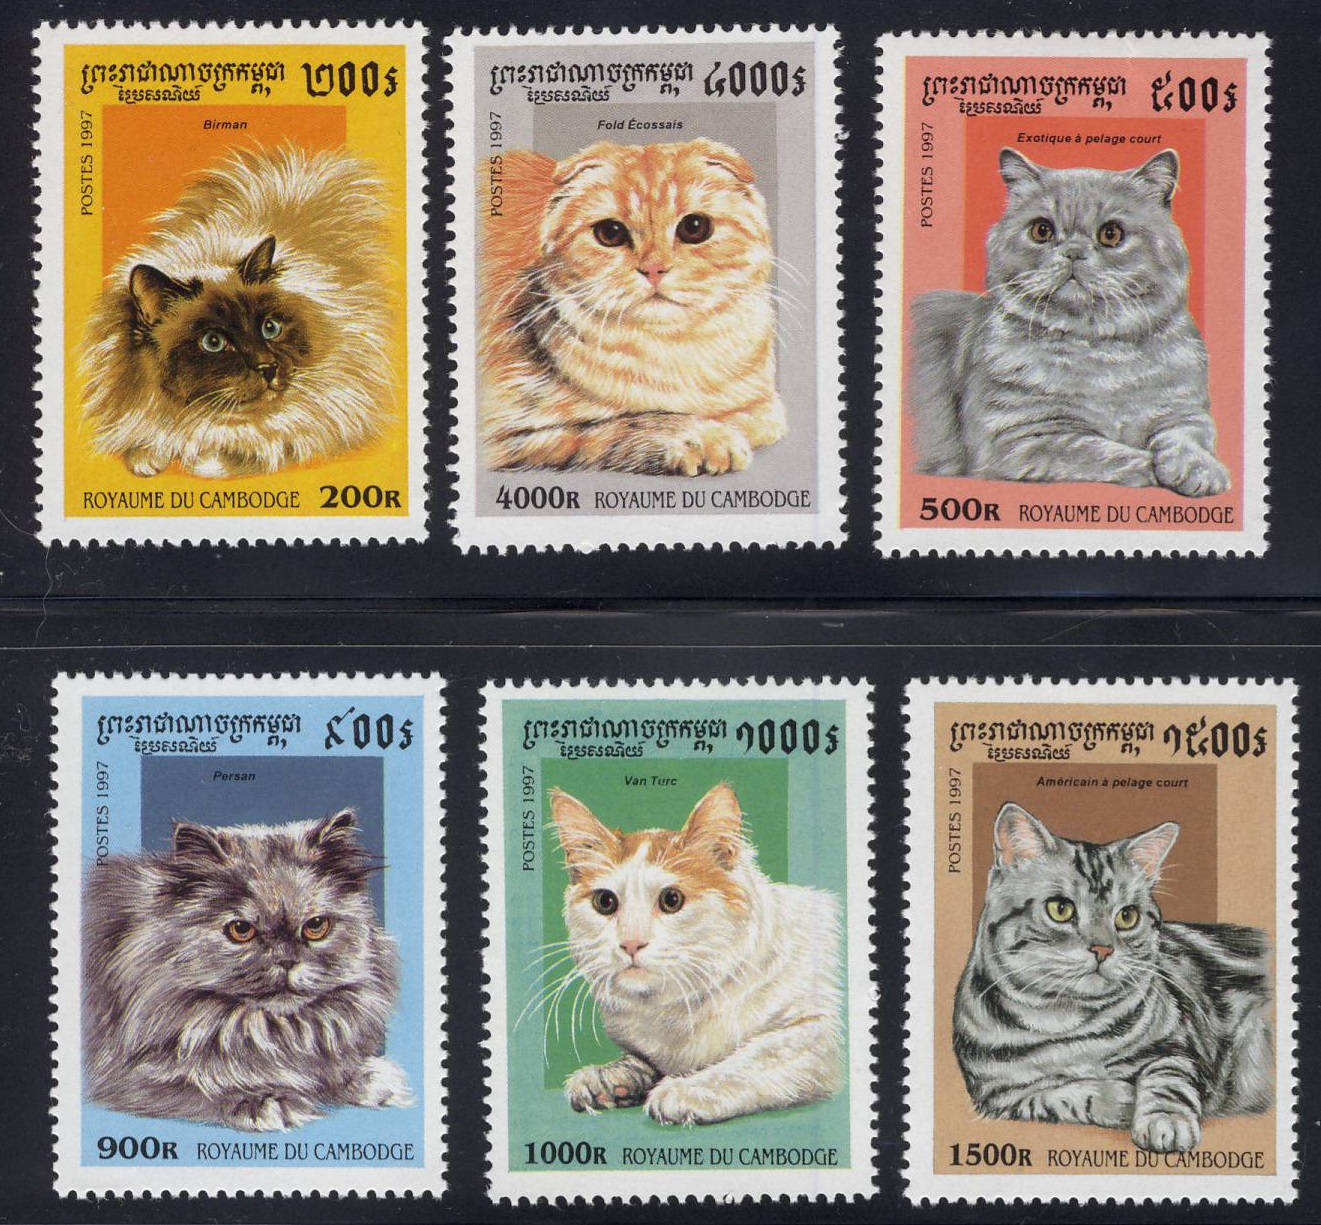 1997 Cambodia Cats Postage Stamps